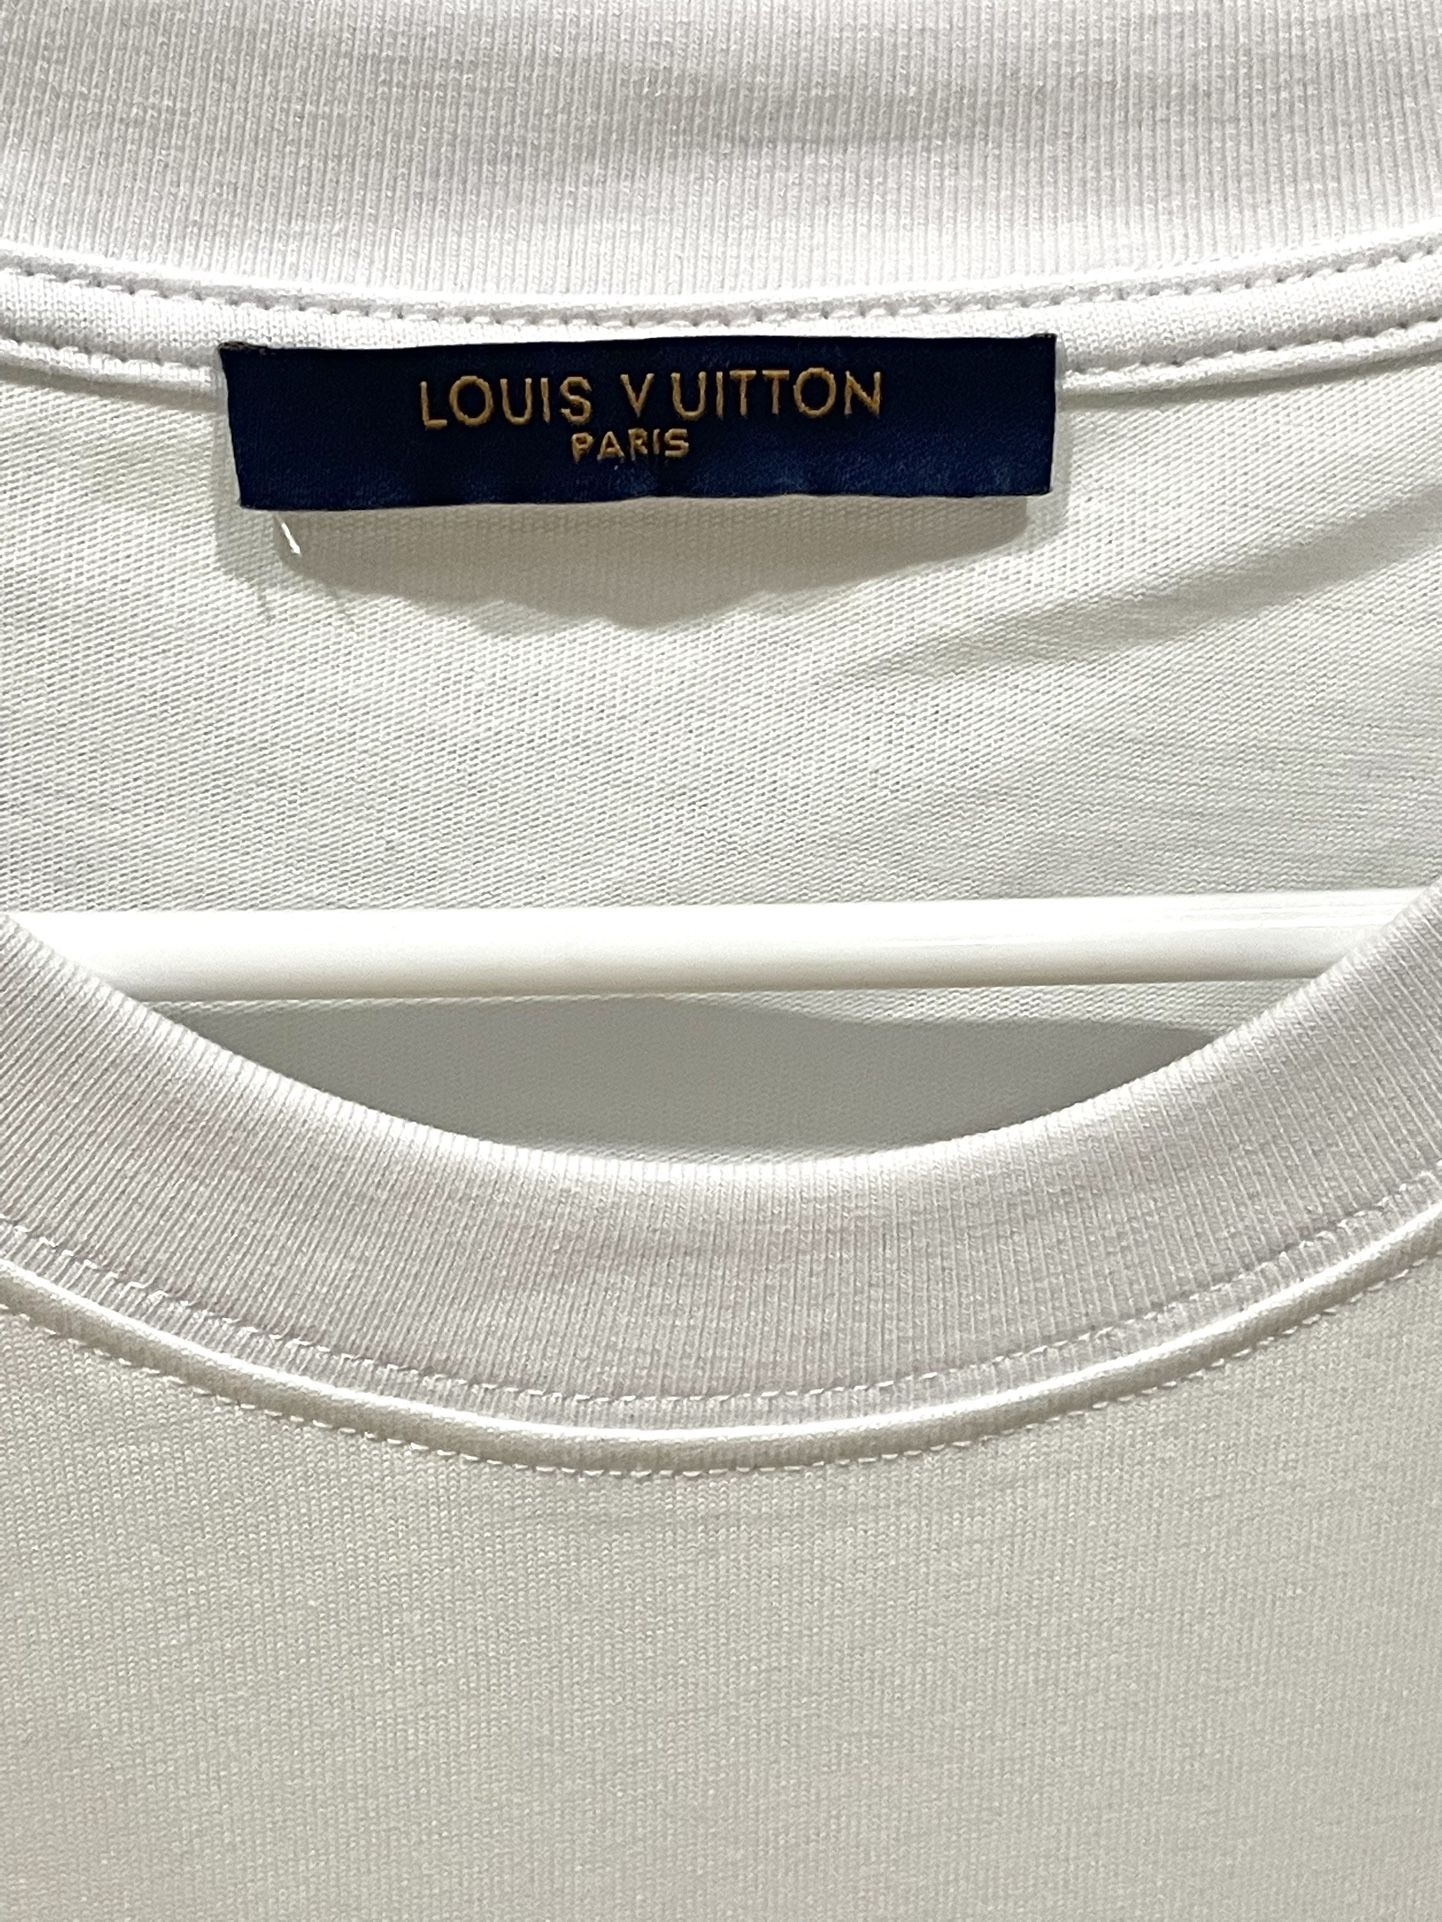 Louis Vuitton Duck Tee Shirt for Sale in Brooklyn, NY - OfferUp